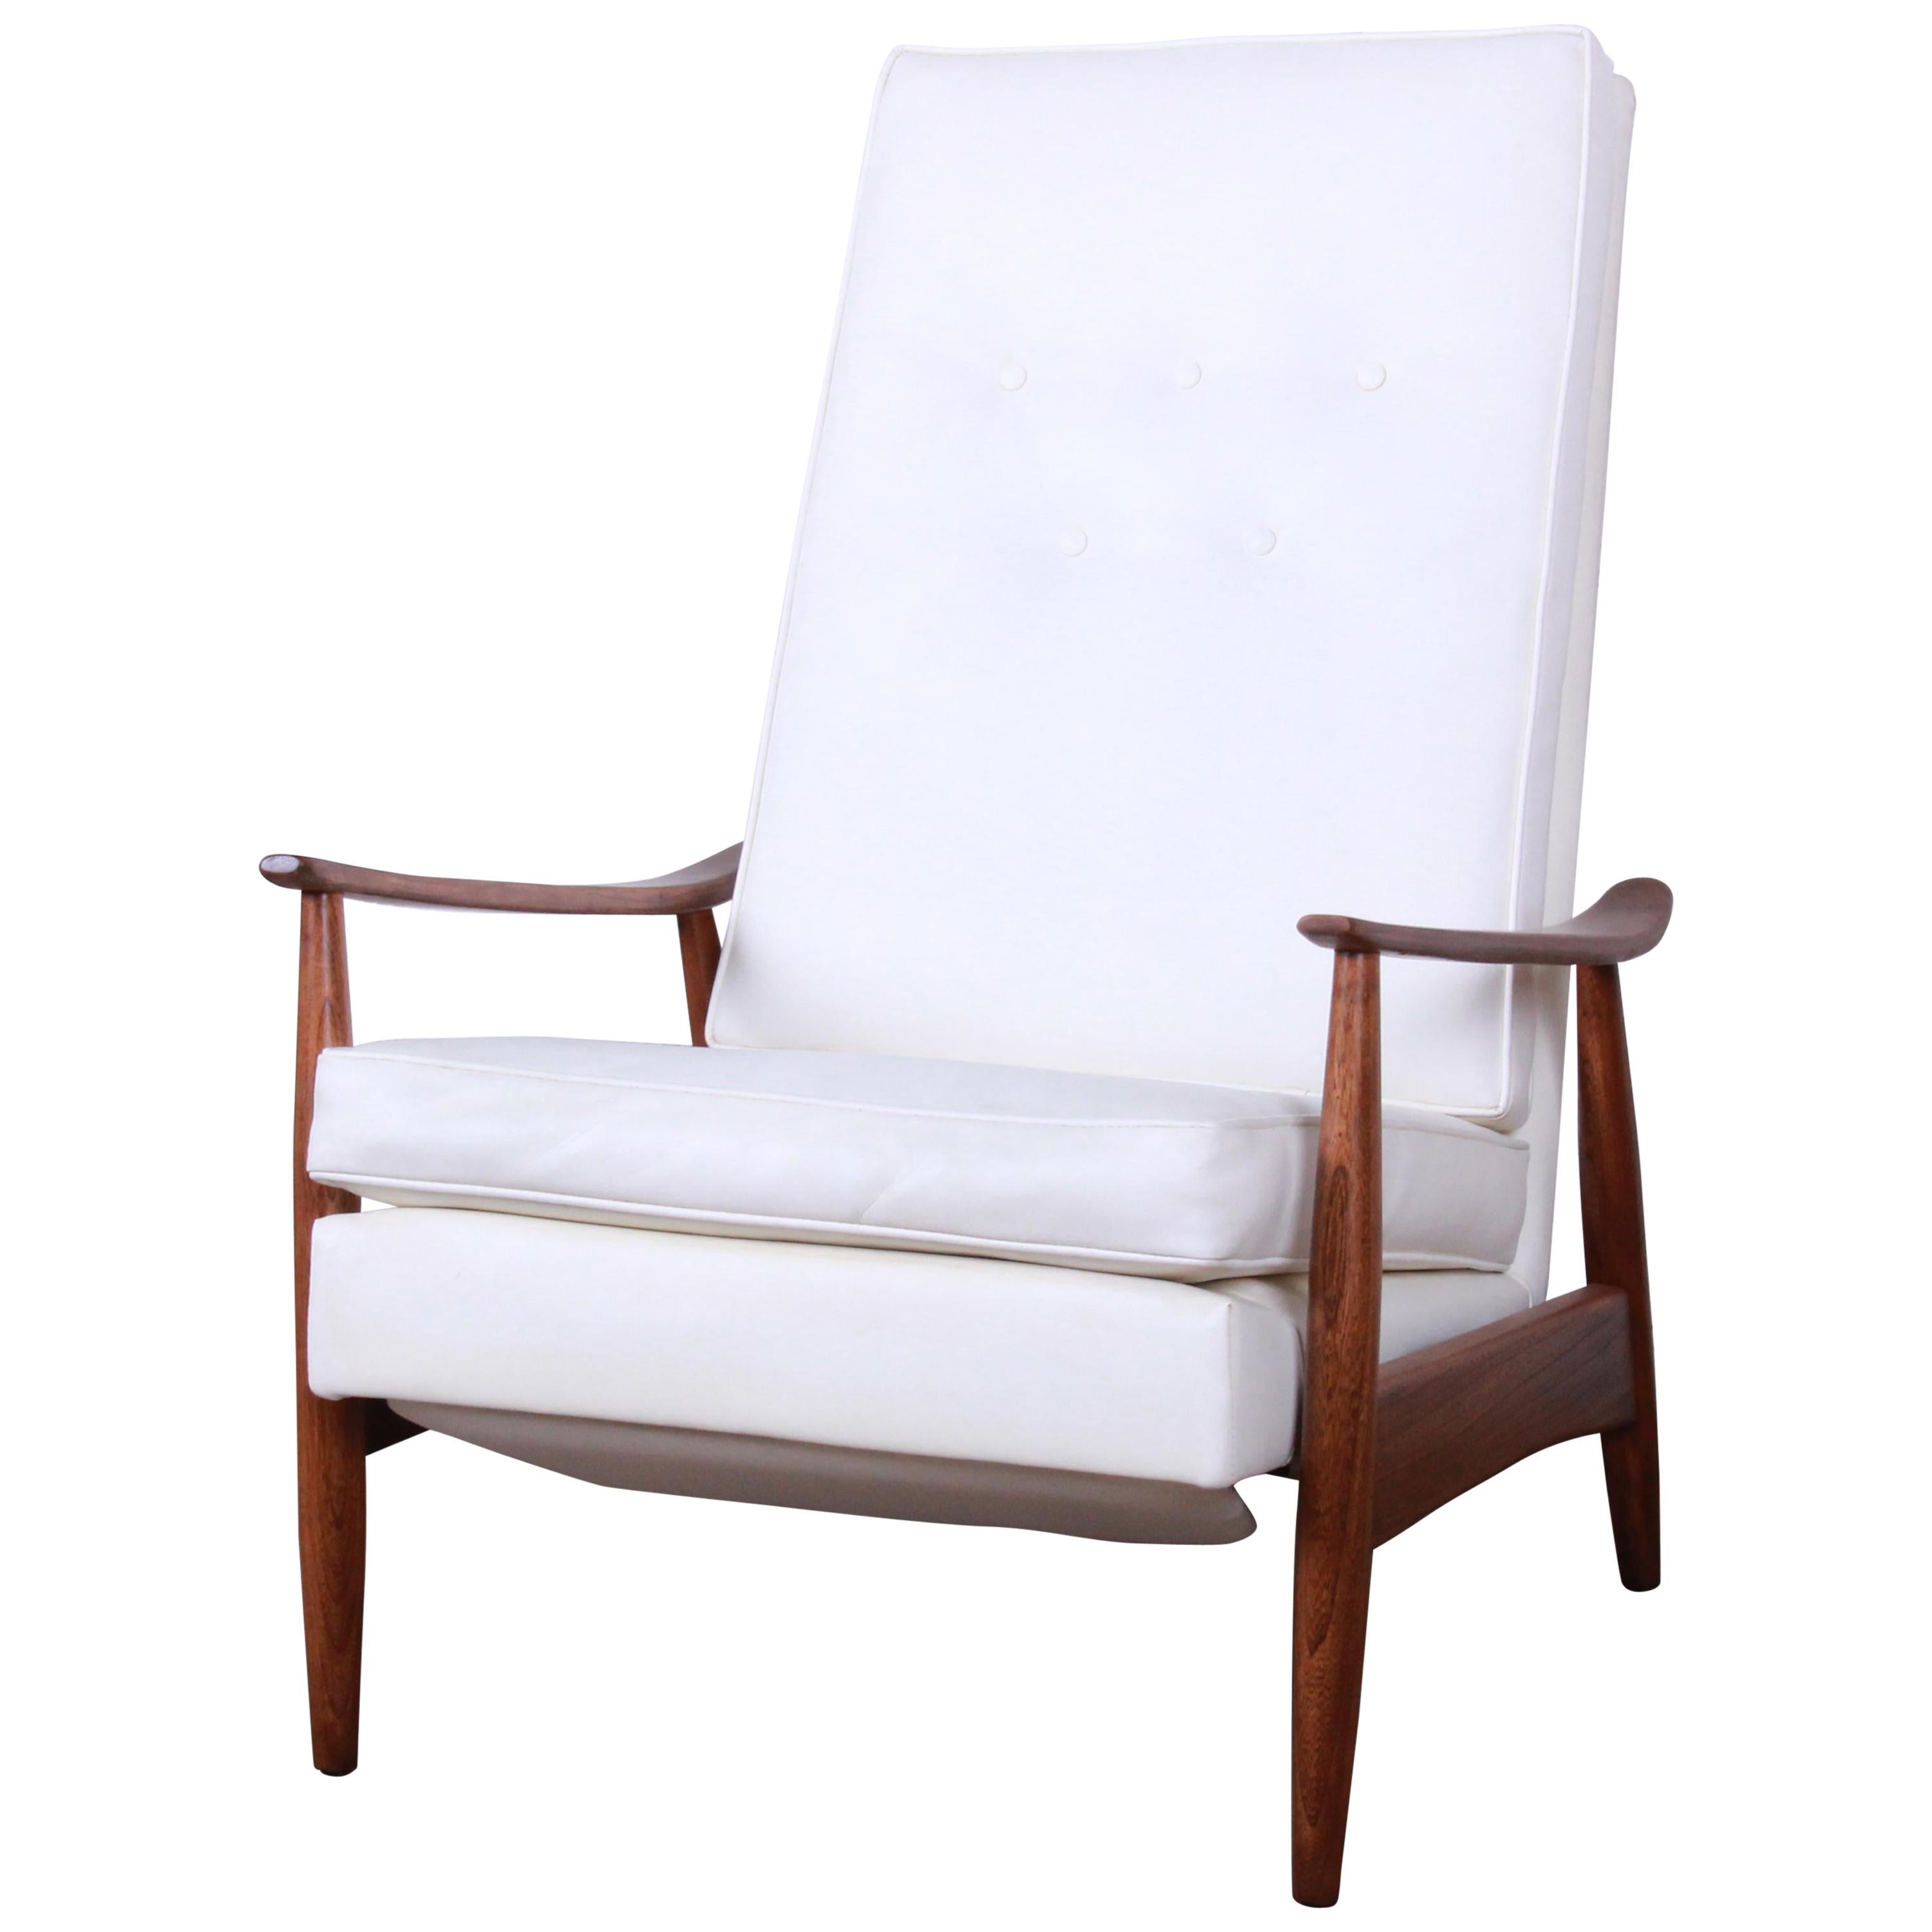 Milo Baughman for James Inc. Reclining Lounge Chair, Newly Refinished